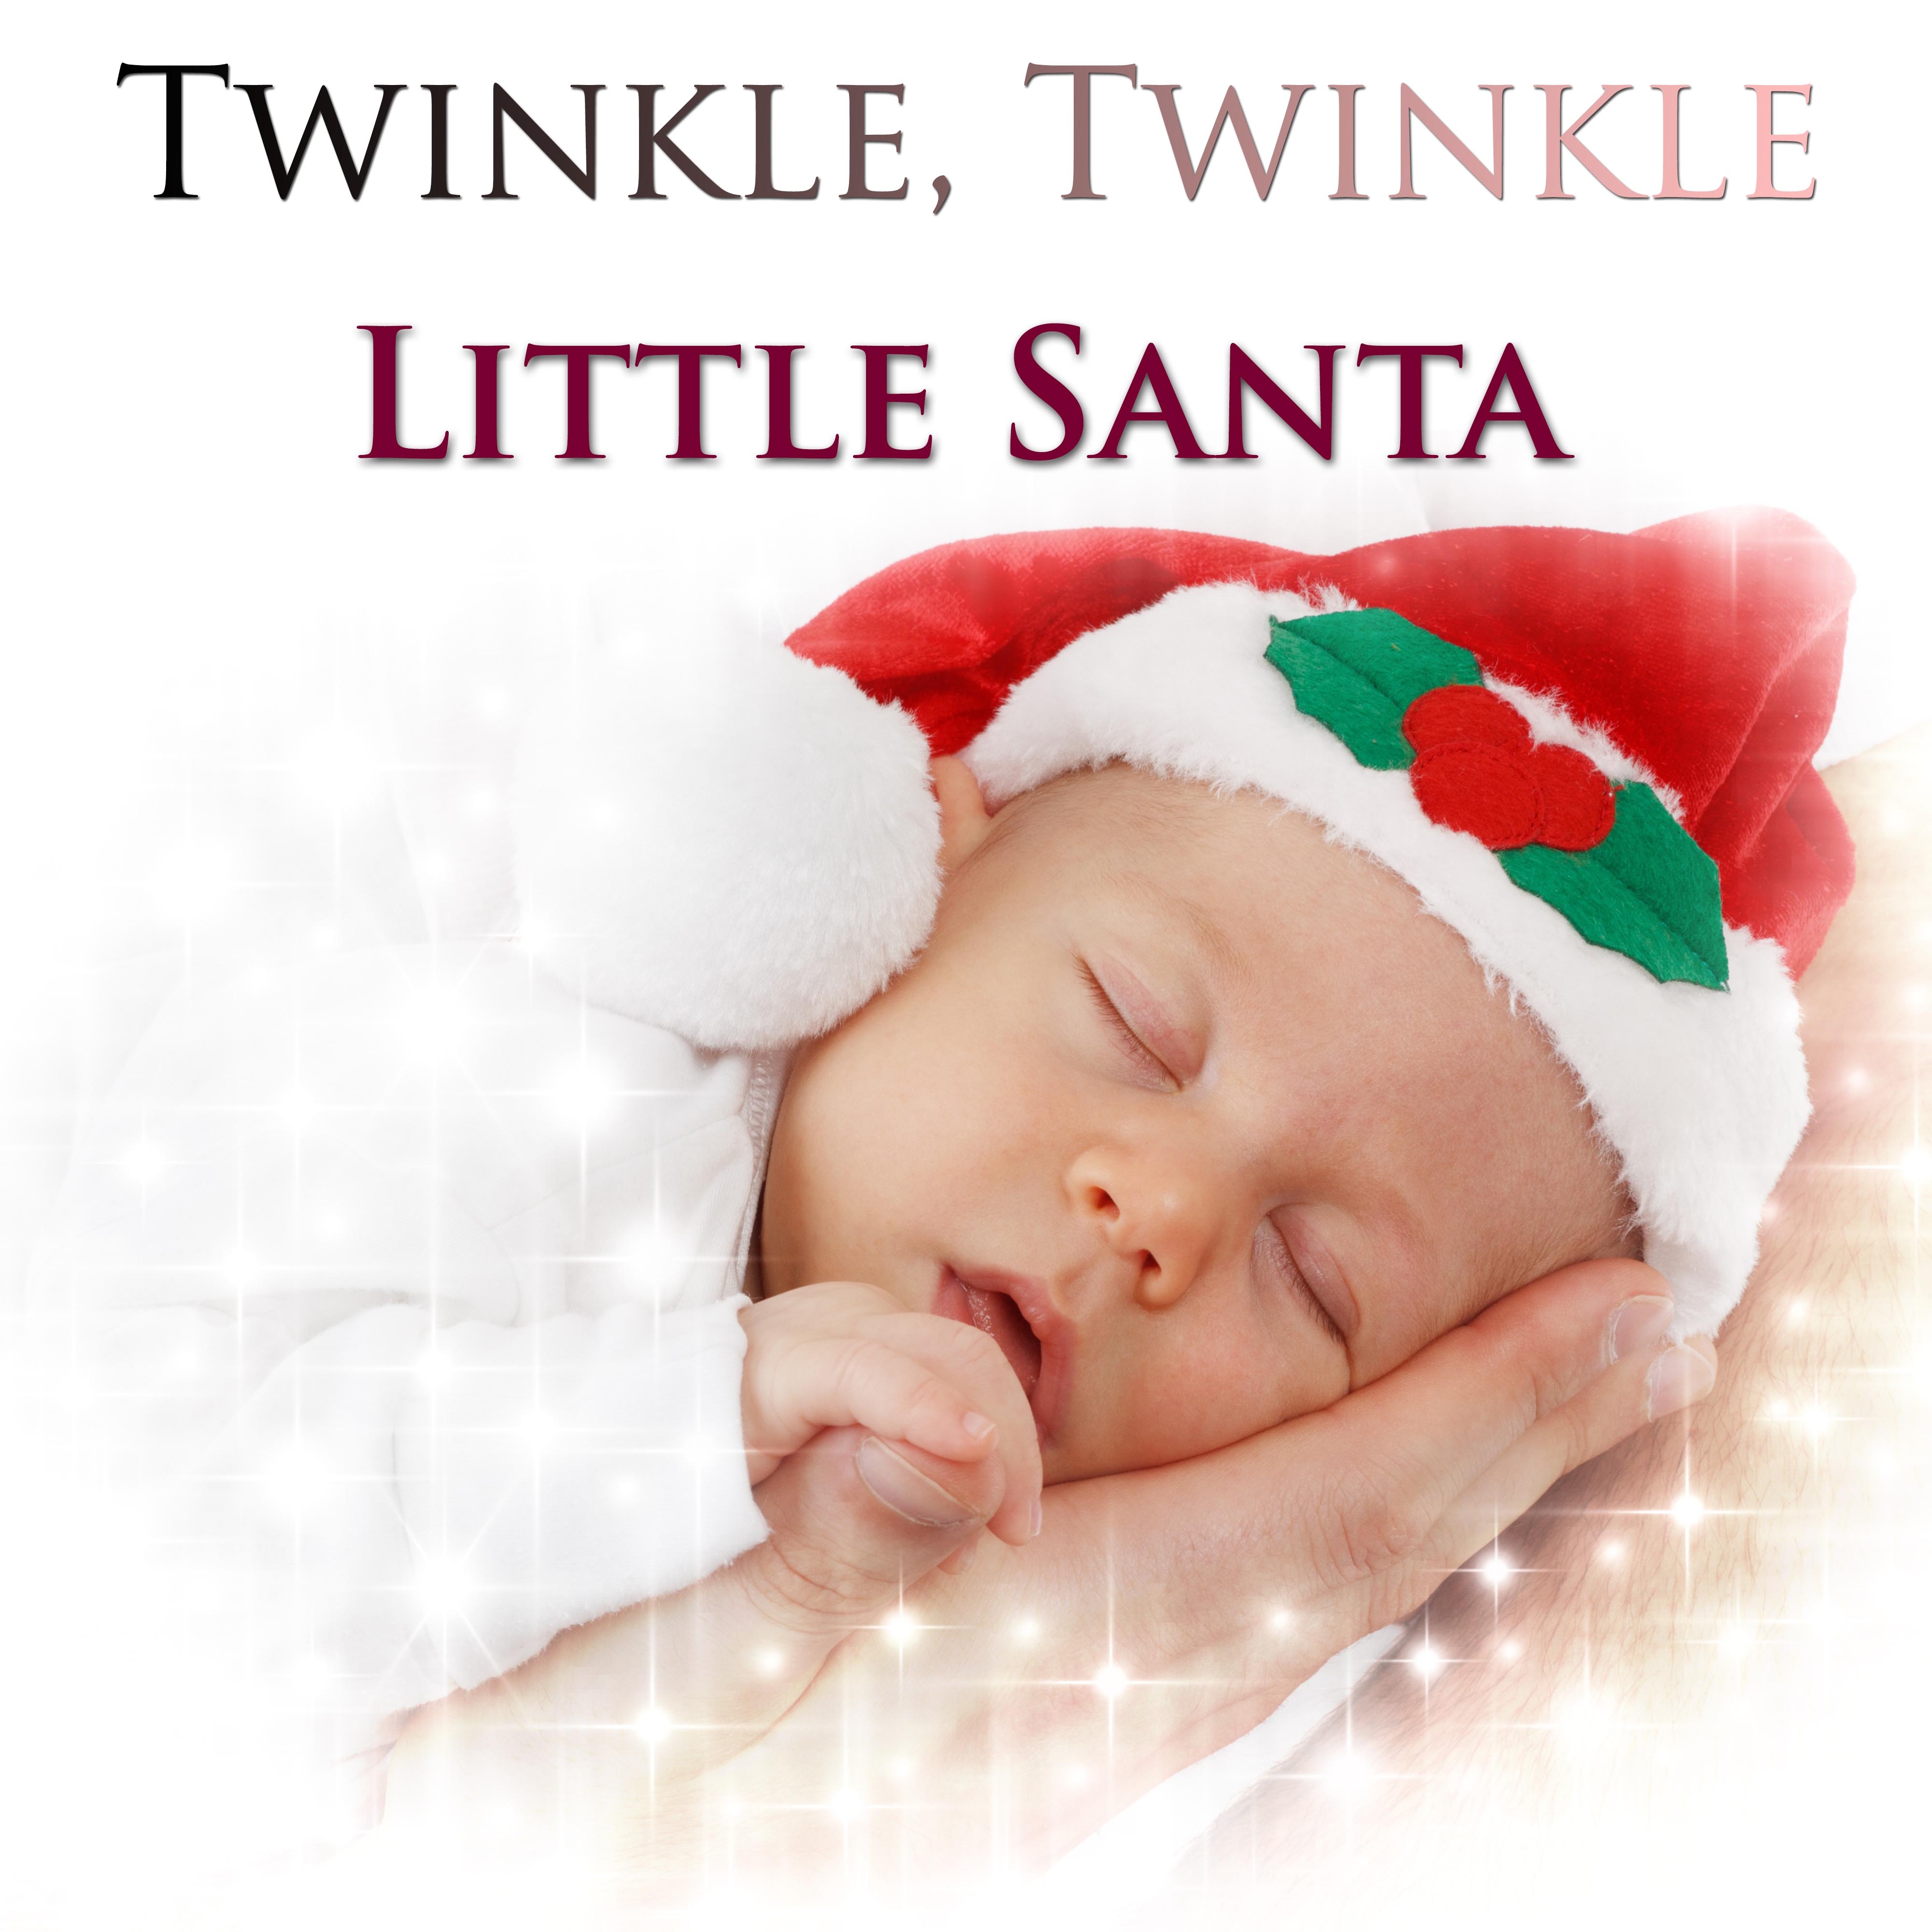 Twinkle Twinkle Little Santa: the 30 Best Relaxing Songs for Babies and Pregnant Mothers during Christmas Time to Sleep Better and Find Peace and Serenity with Piano Music